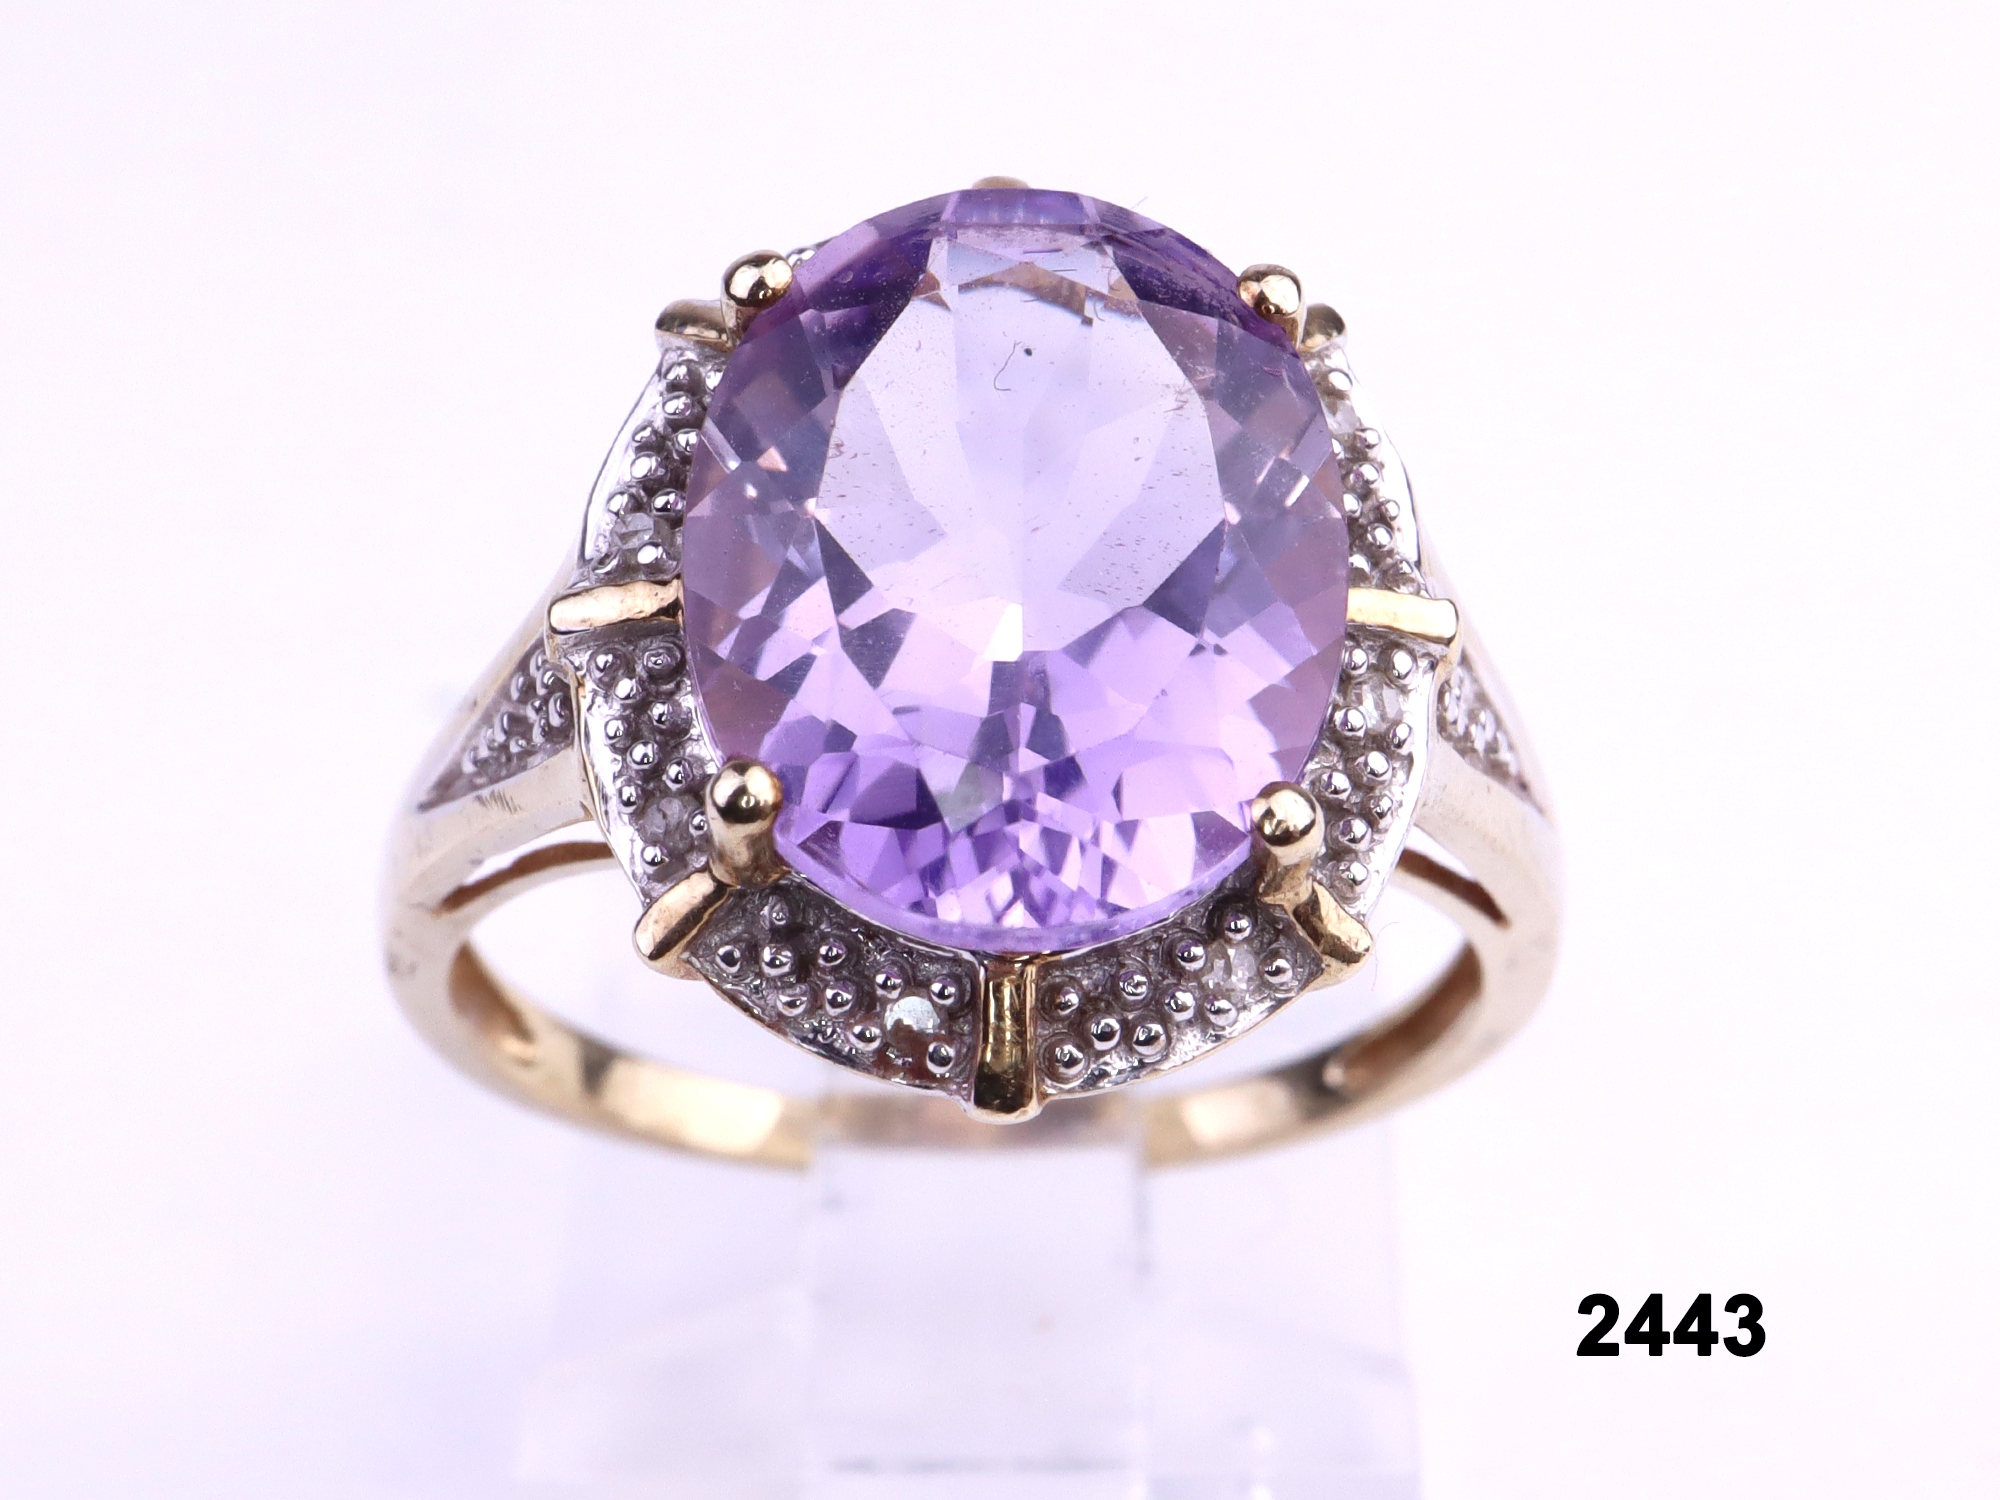 where to buy vintage rings online